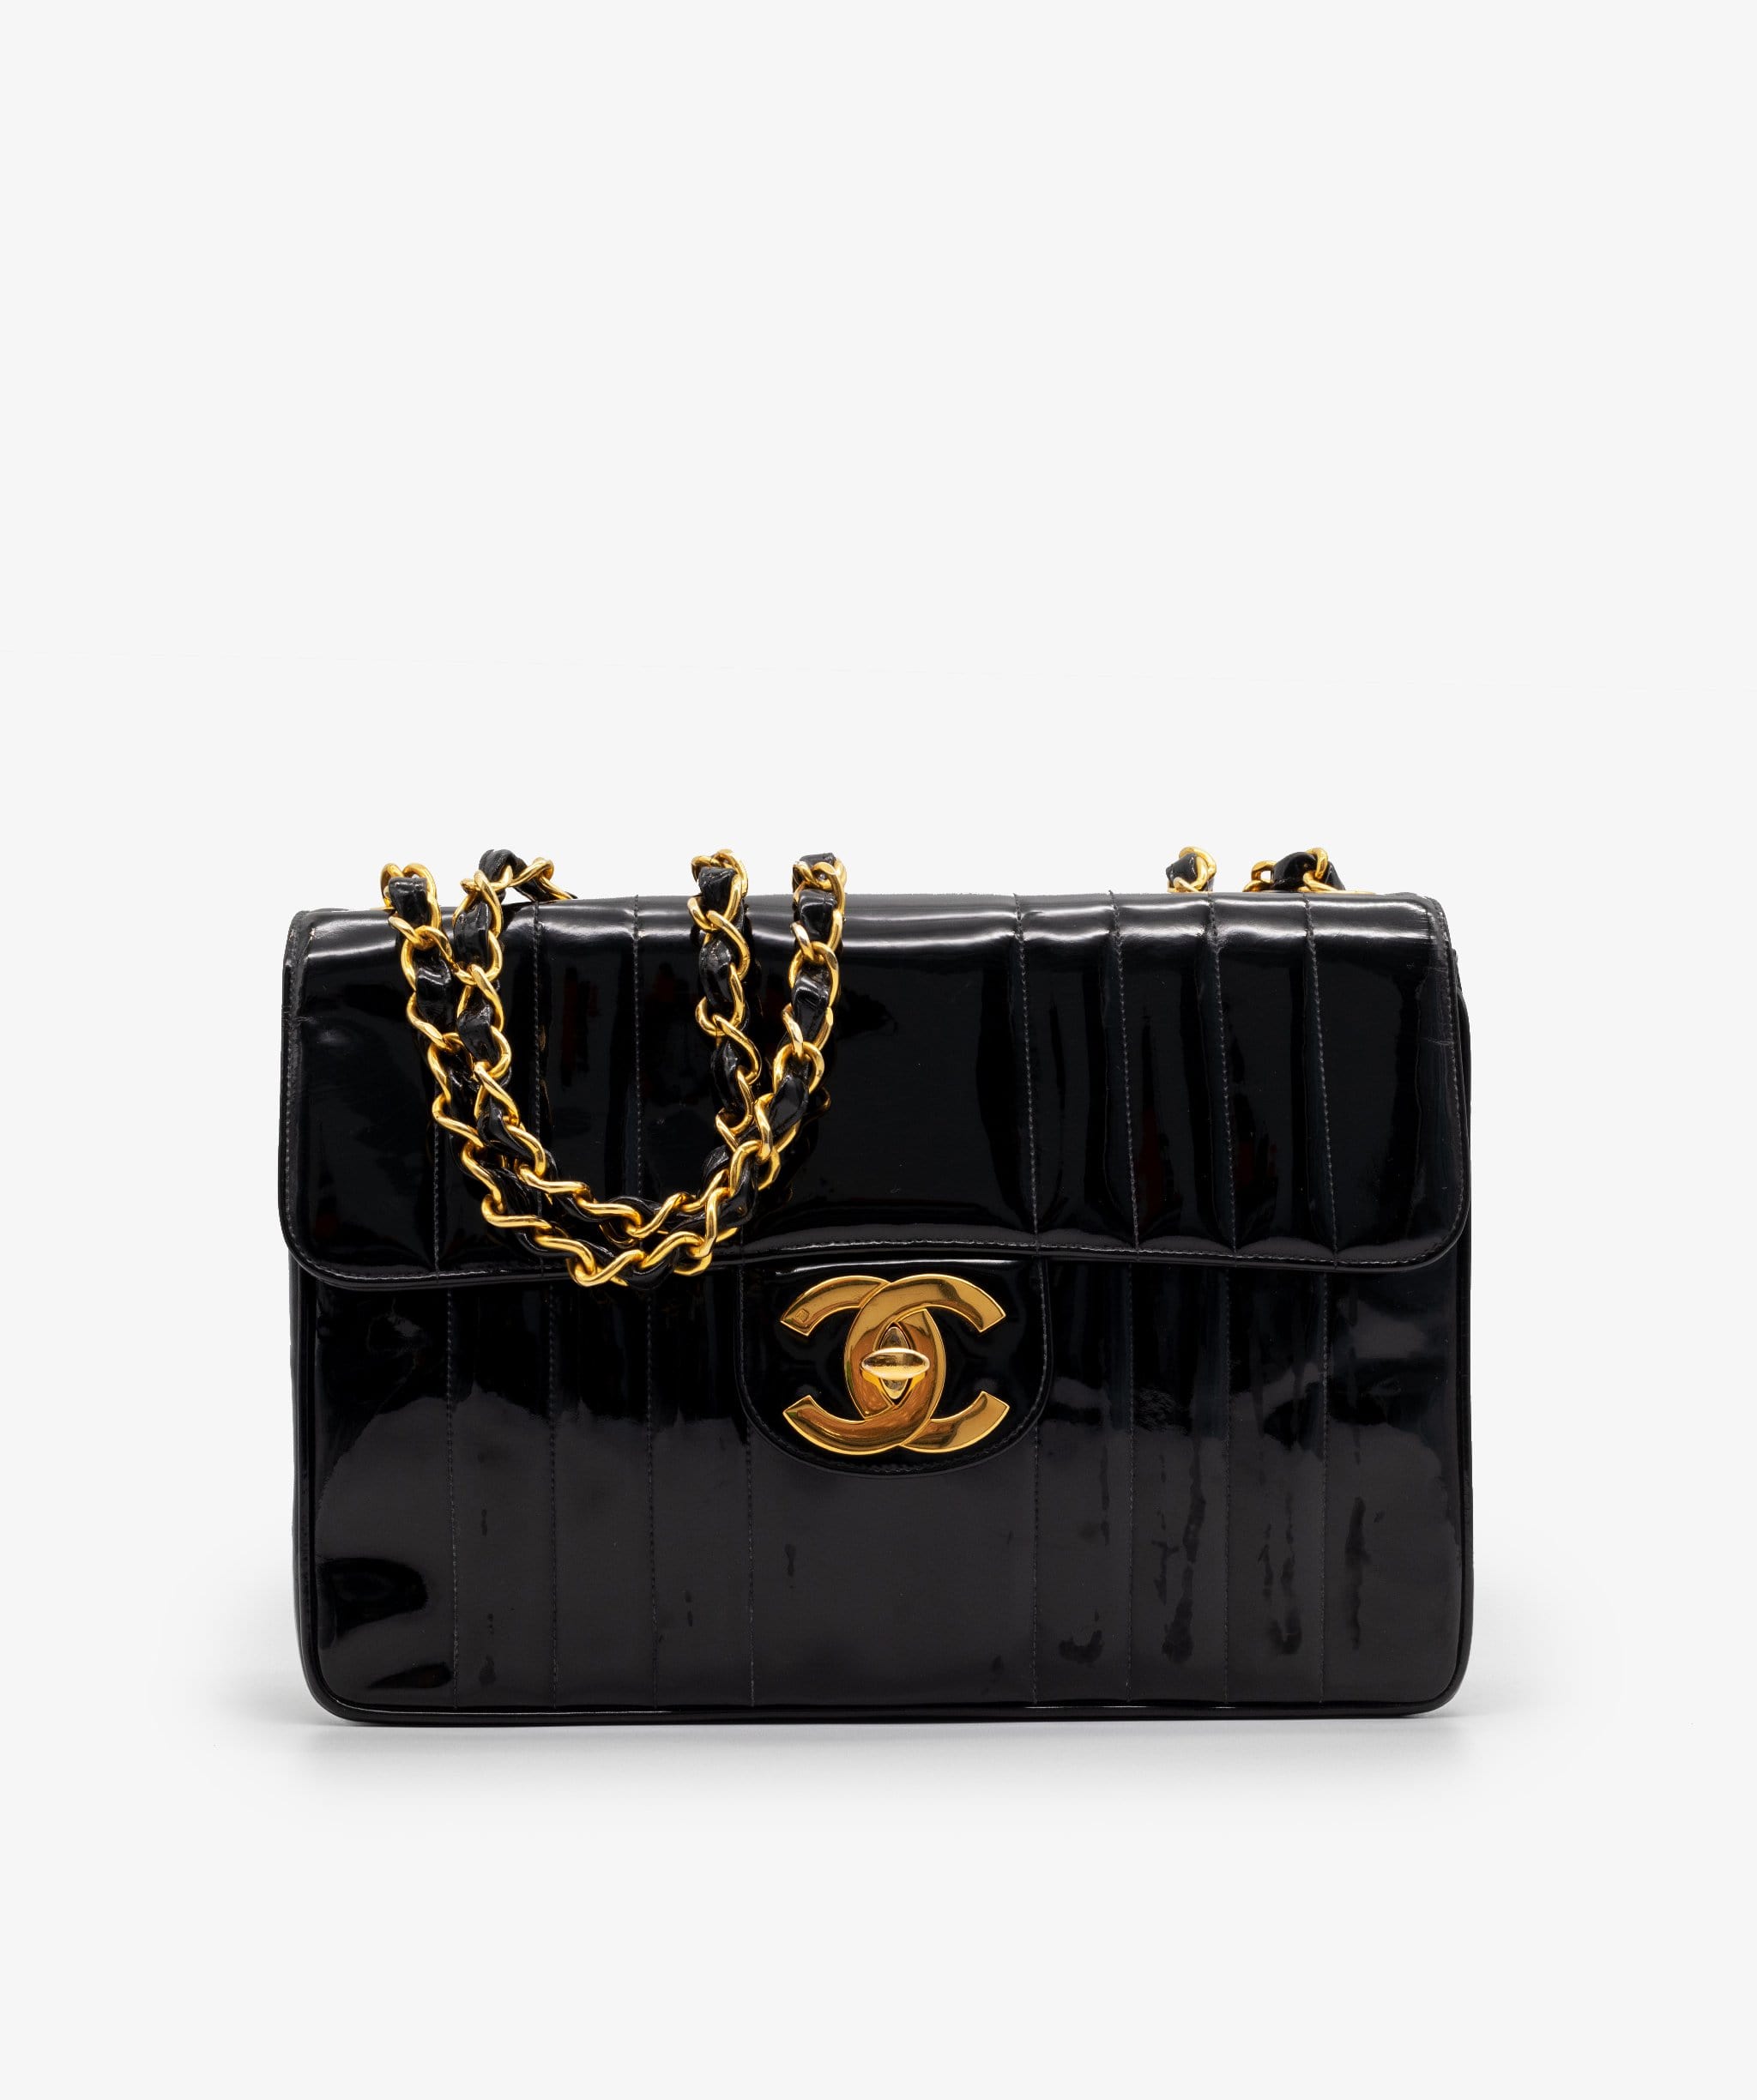 Chanel Chanel Vertical Stitch Patent Flap Bag - AWL1532